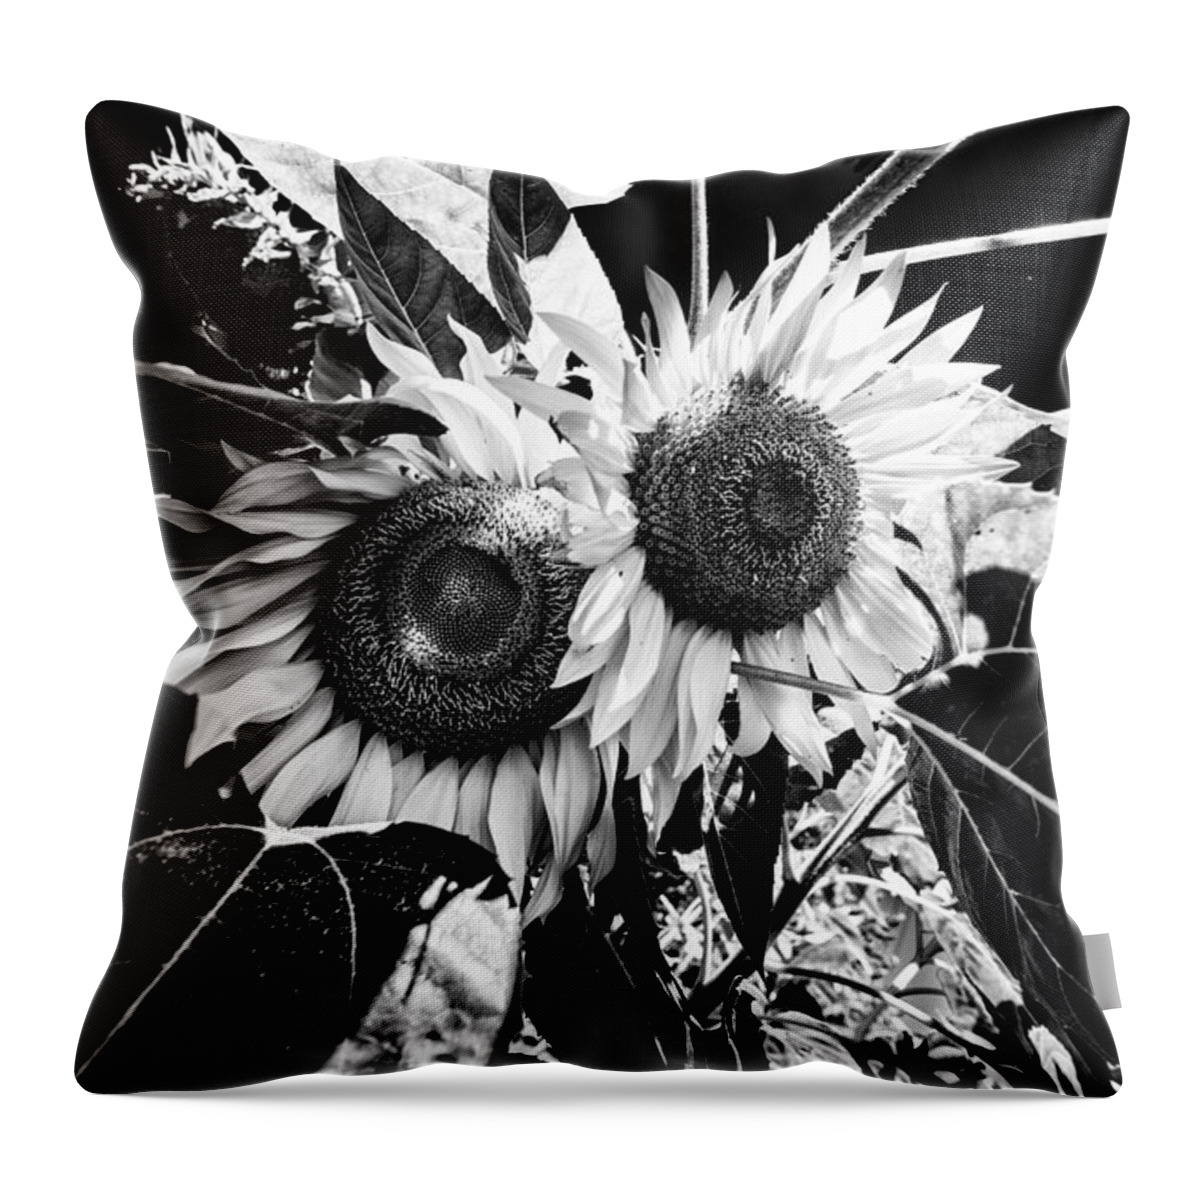 Plants Throw Pillow featuring the photograph Twin Sunflowers by Kevin Cable